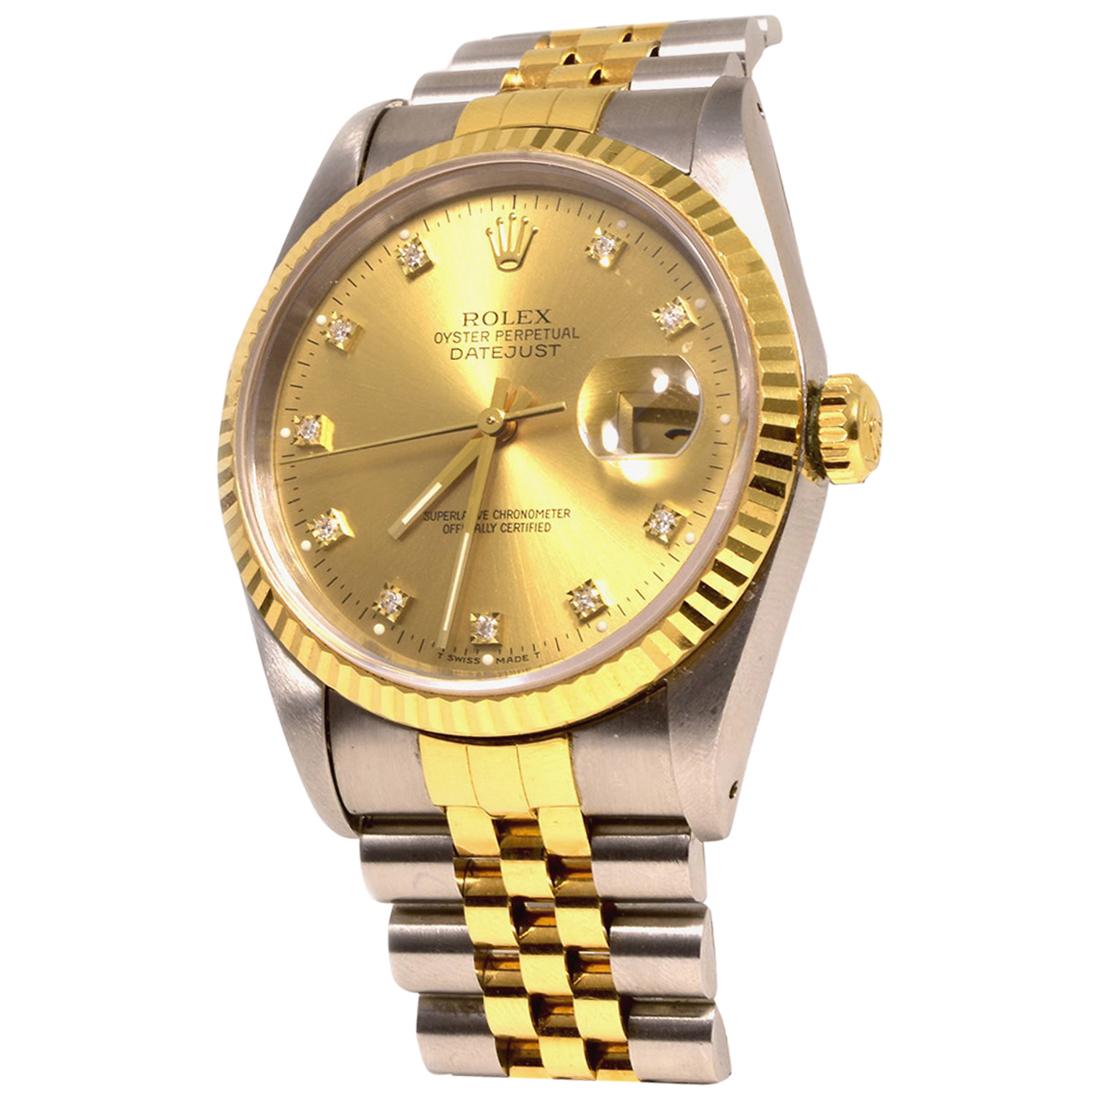 Rolex Datejust Two-Tone 16233 Gold Dial 18k Yellow Gold & Stainless Steel 36MM